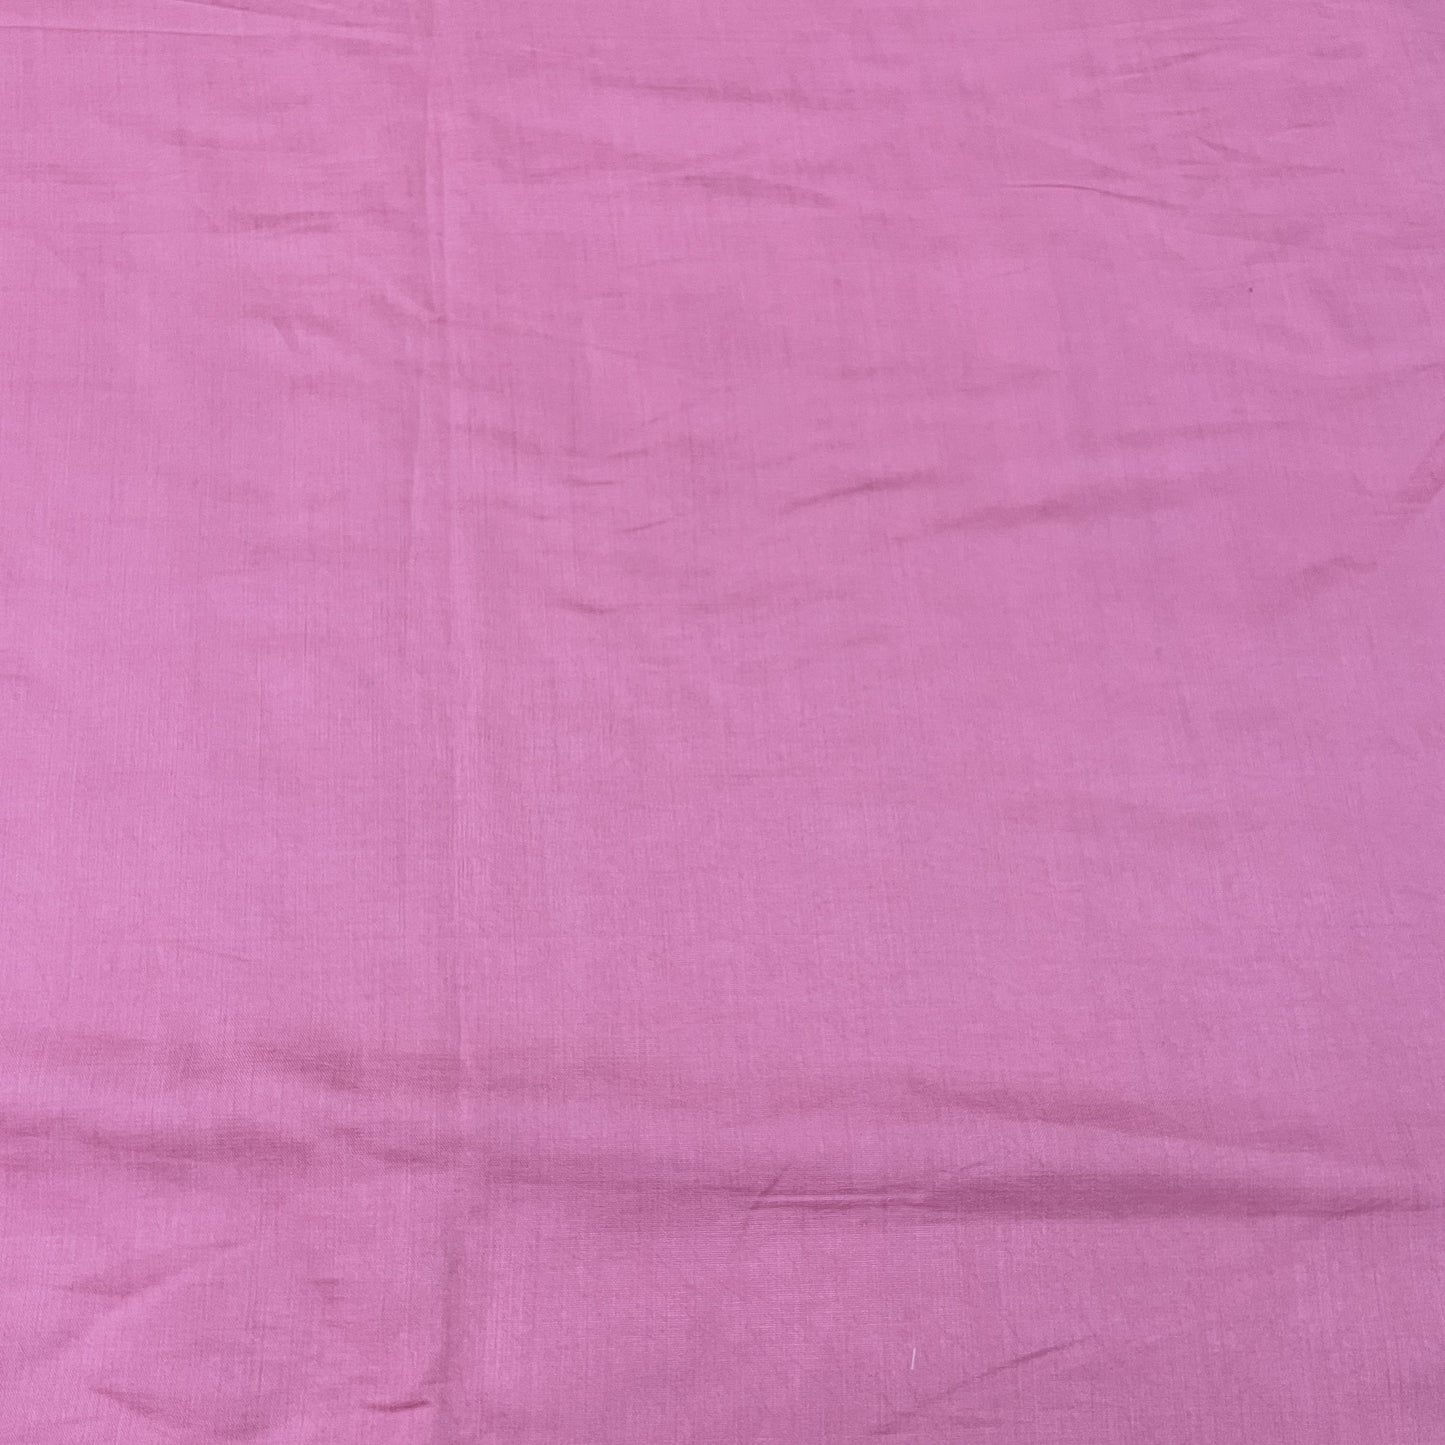 Exclusive Baby Pink Solid Silk Fabric